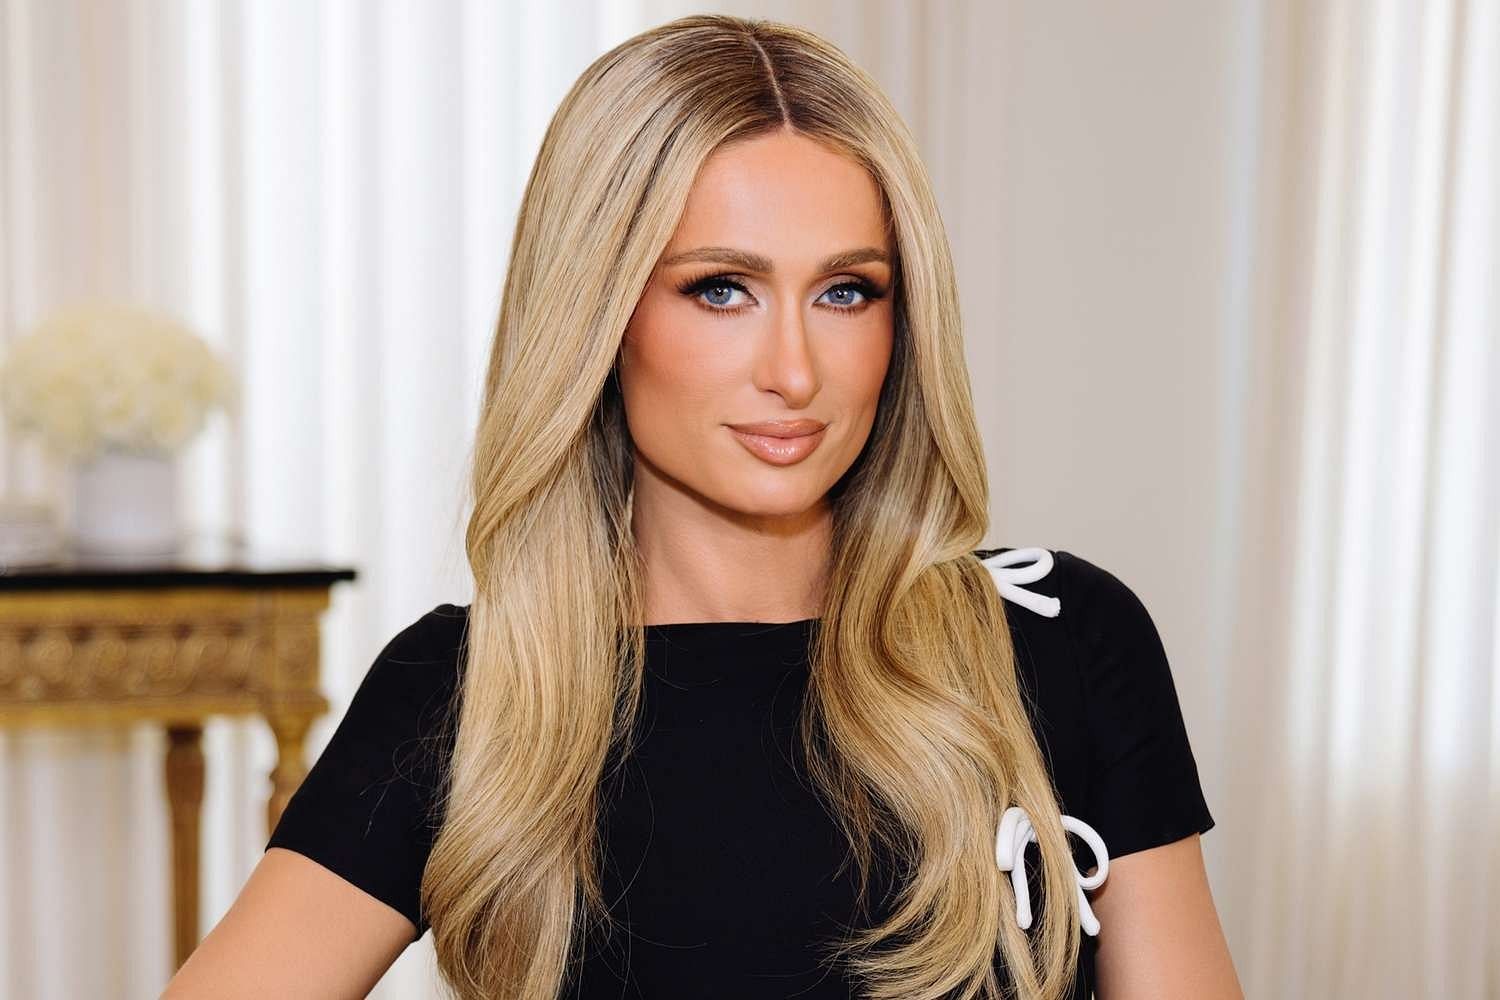 Paris Hilton in celebrities with cold sores (Image via Getty Images)